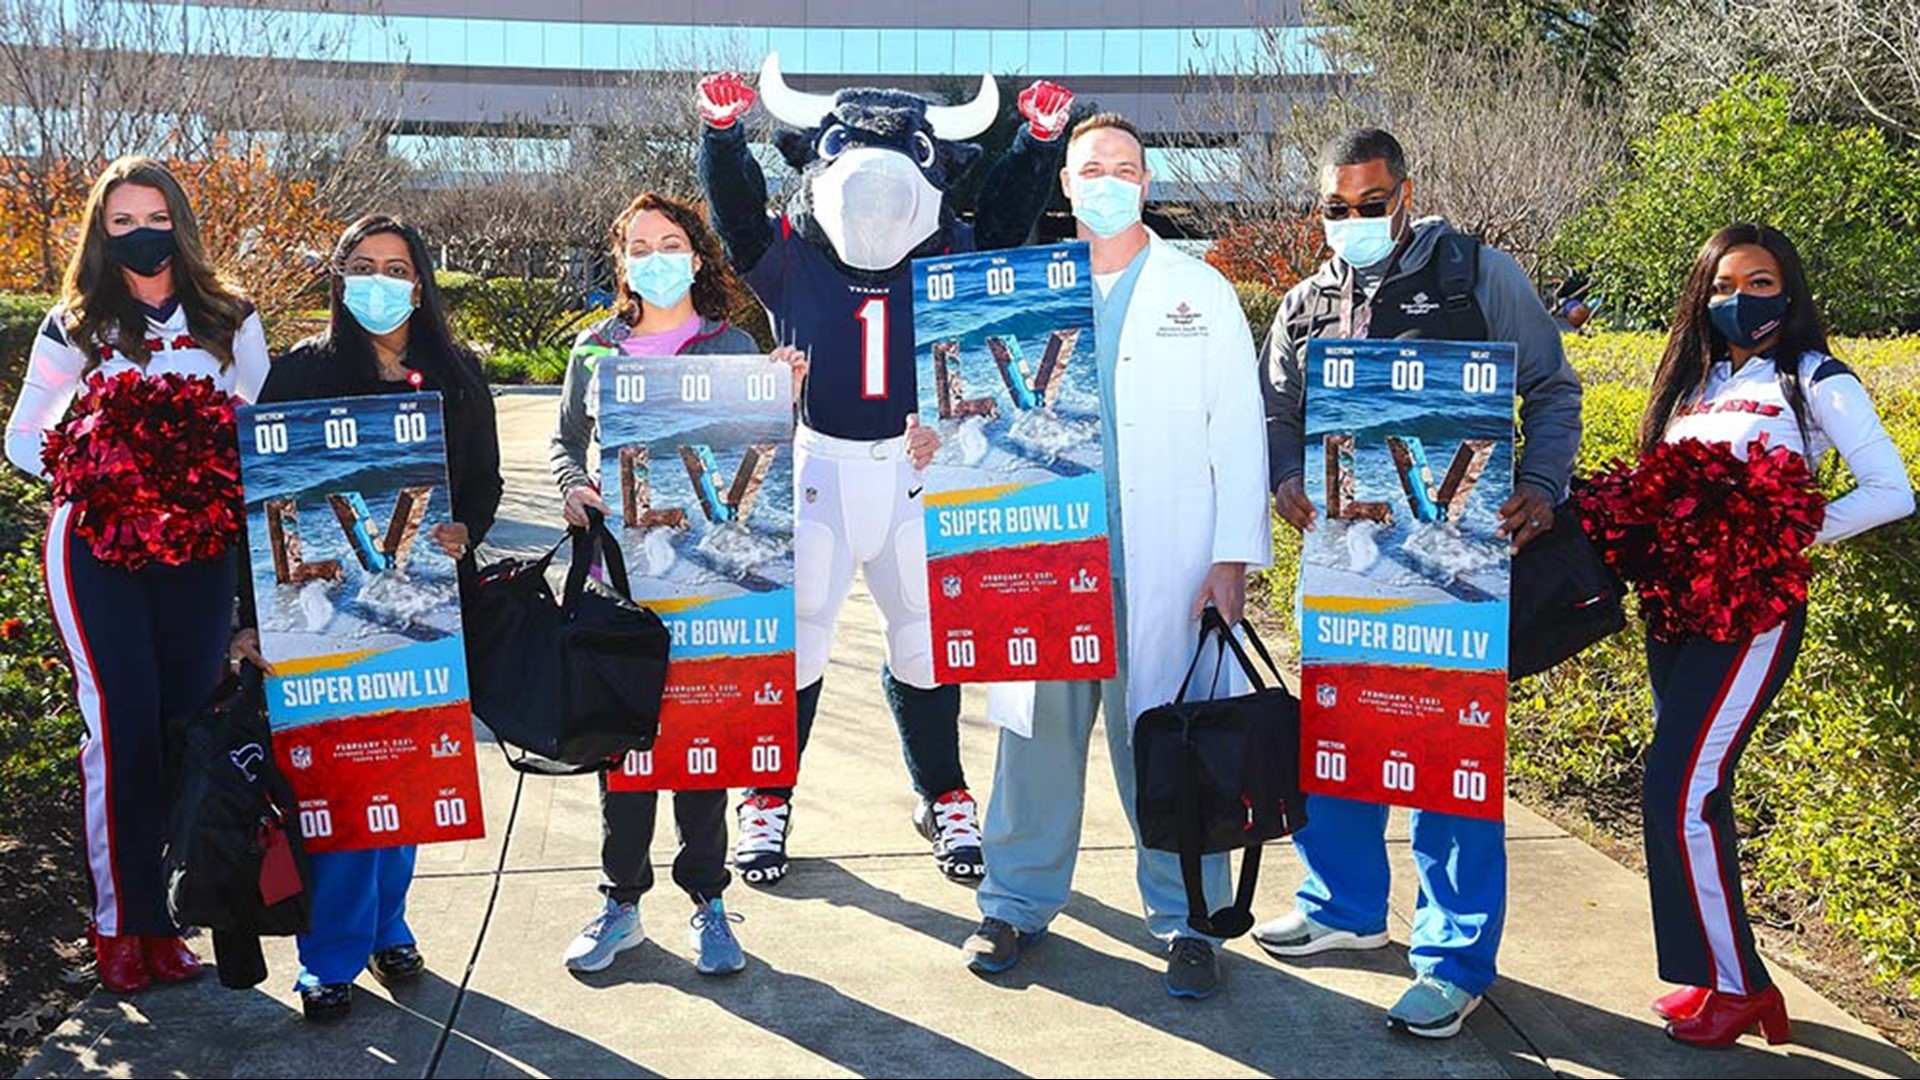 The Houston Texans have invited four healthcare heroes to Super Bowl LV as their guests. The Texas Children’s Hospital employees were surprised  Wednesday.